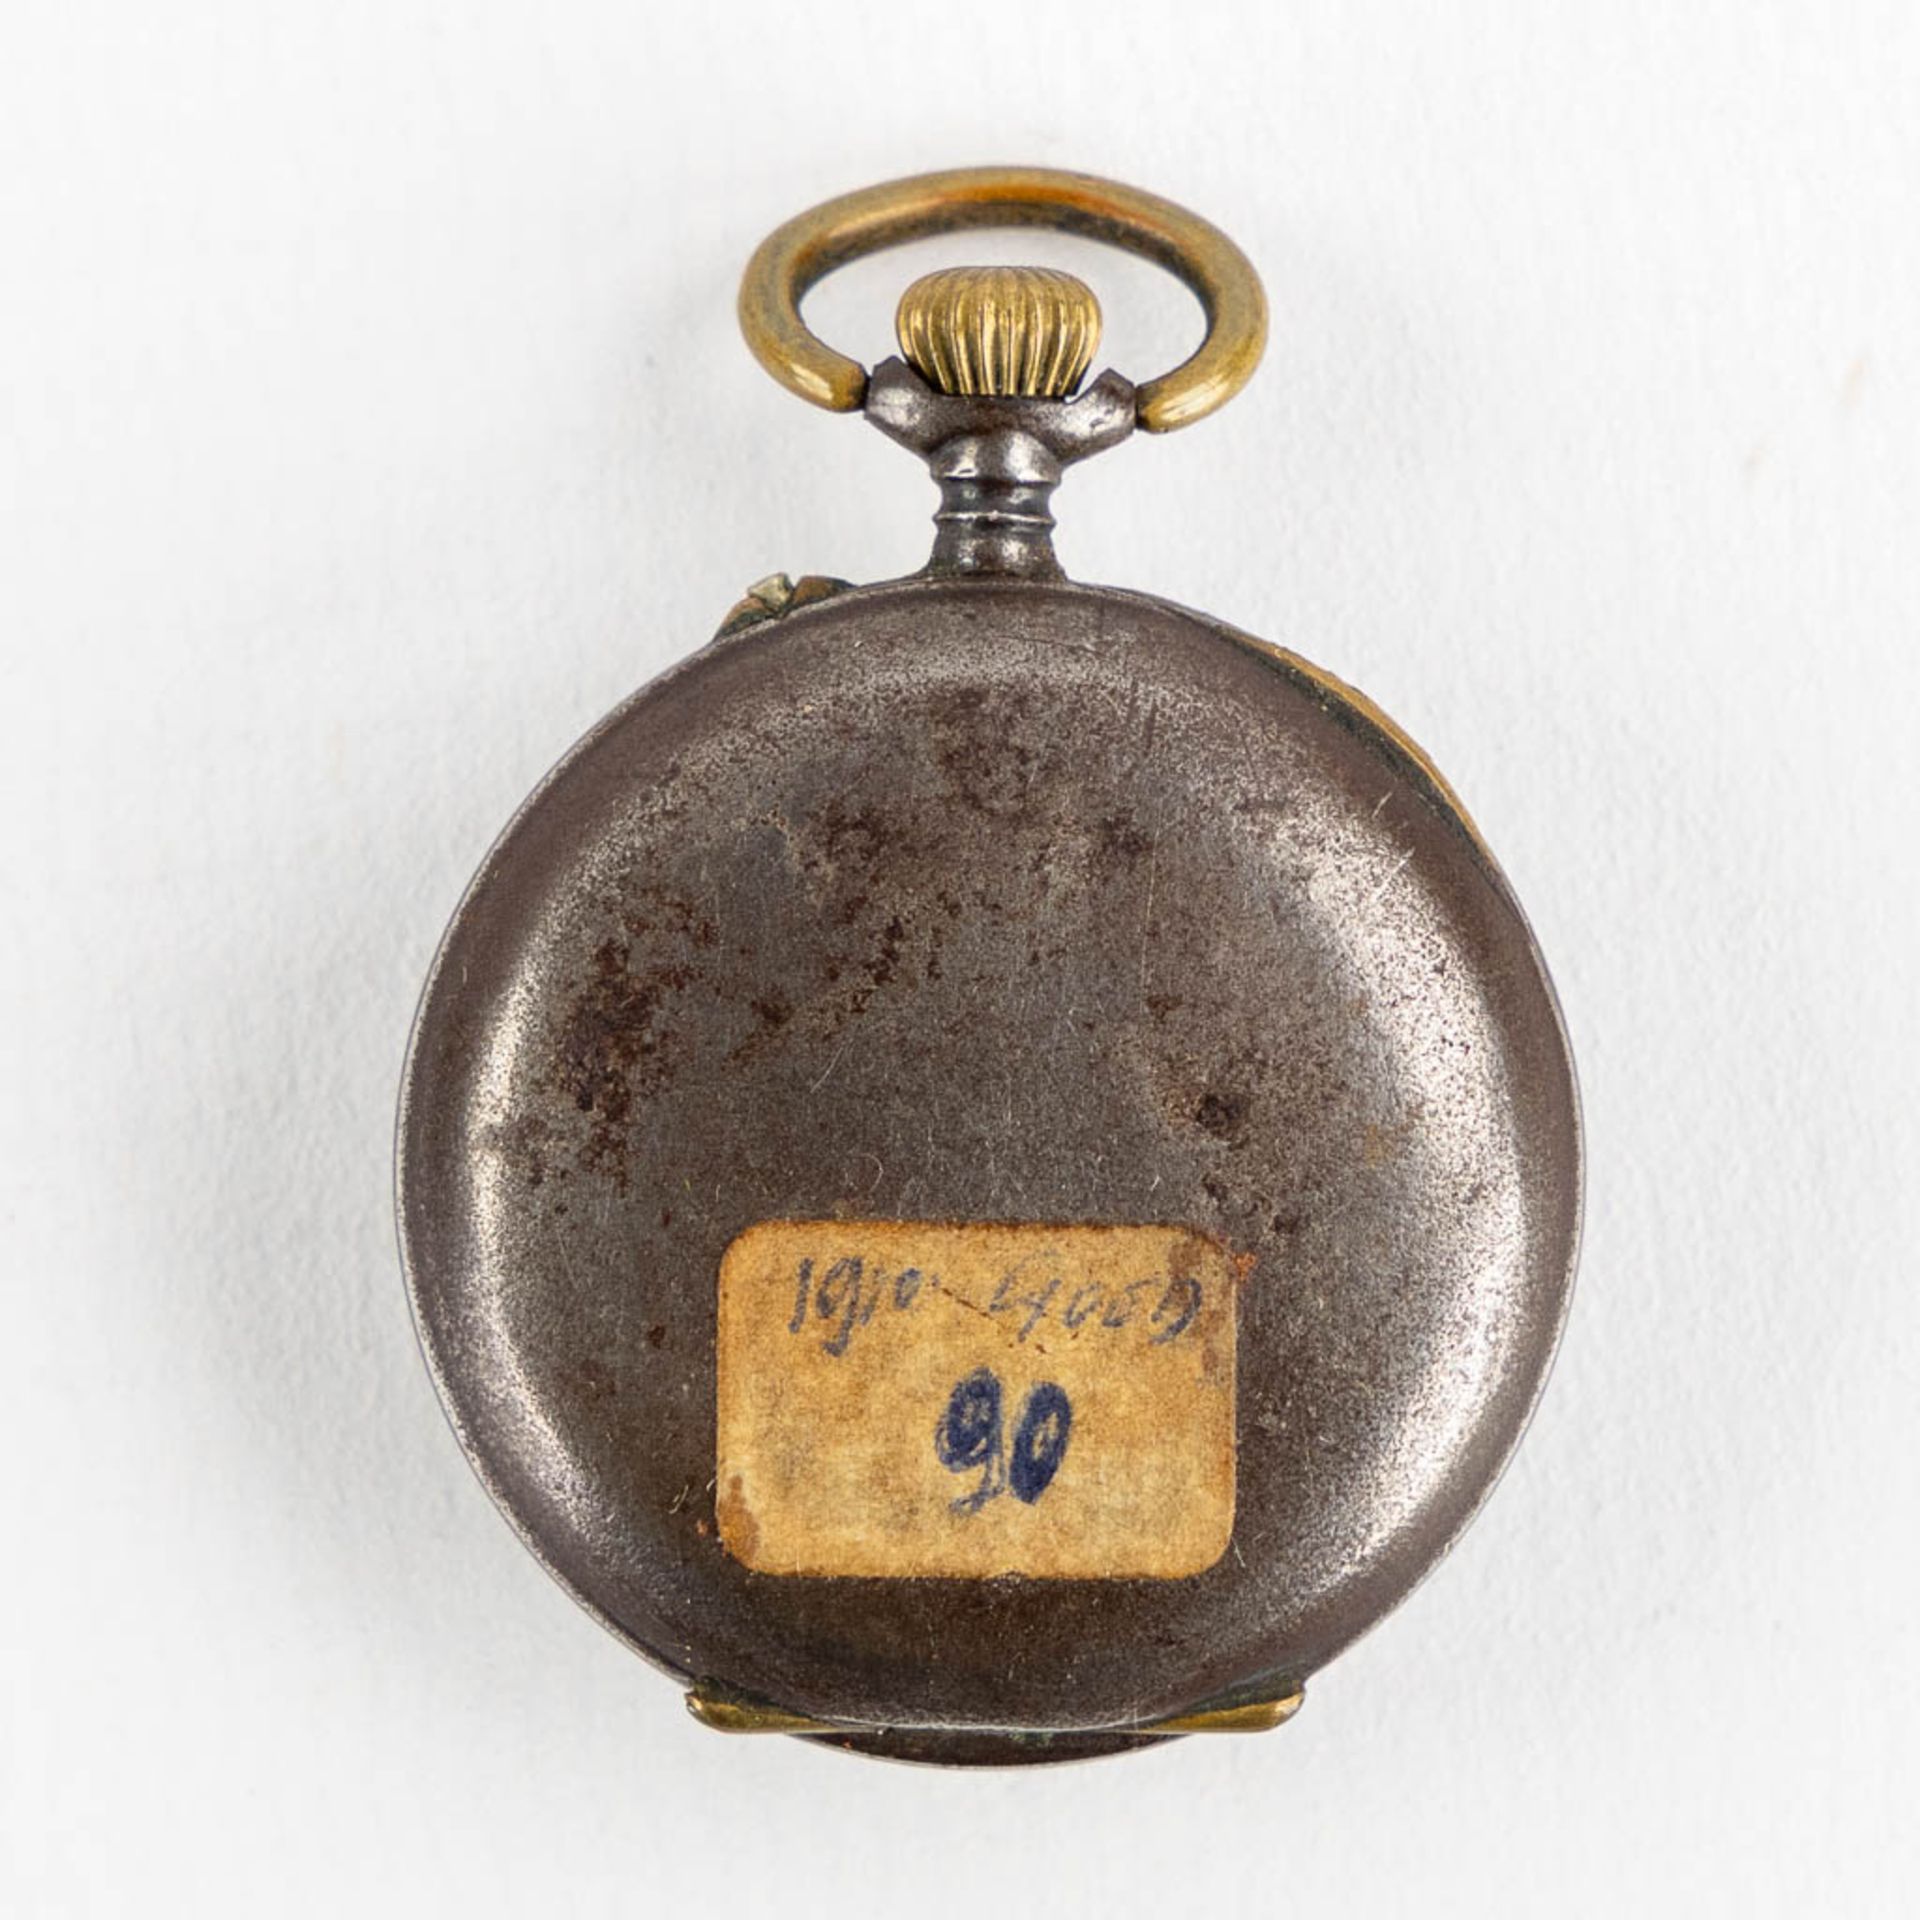 An antique purse, leather mounted with a pocket watch. Brussels, Circa 1920. (W:19 x H:12 cm) - Image 10 of 13